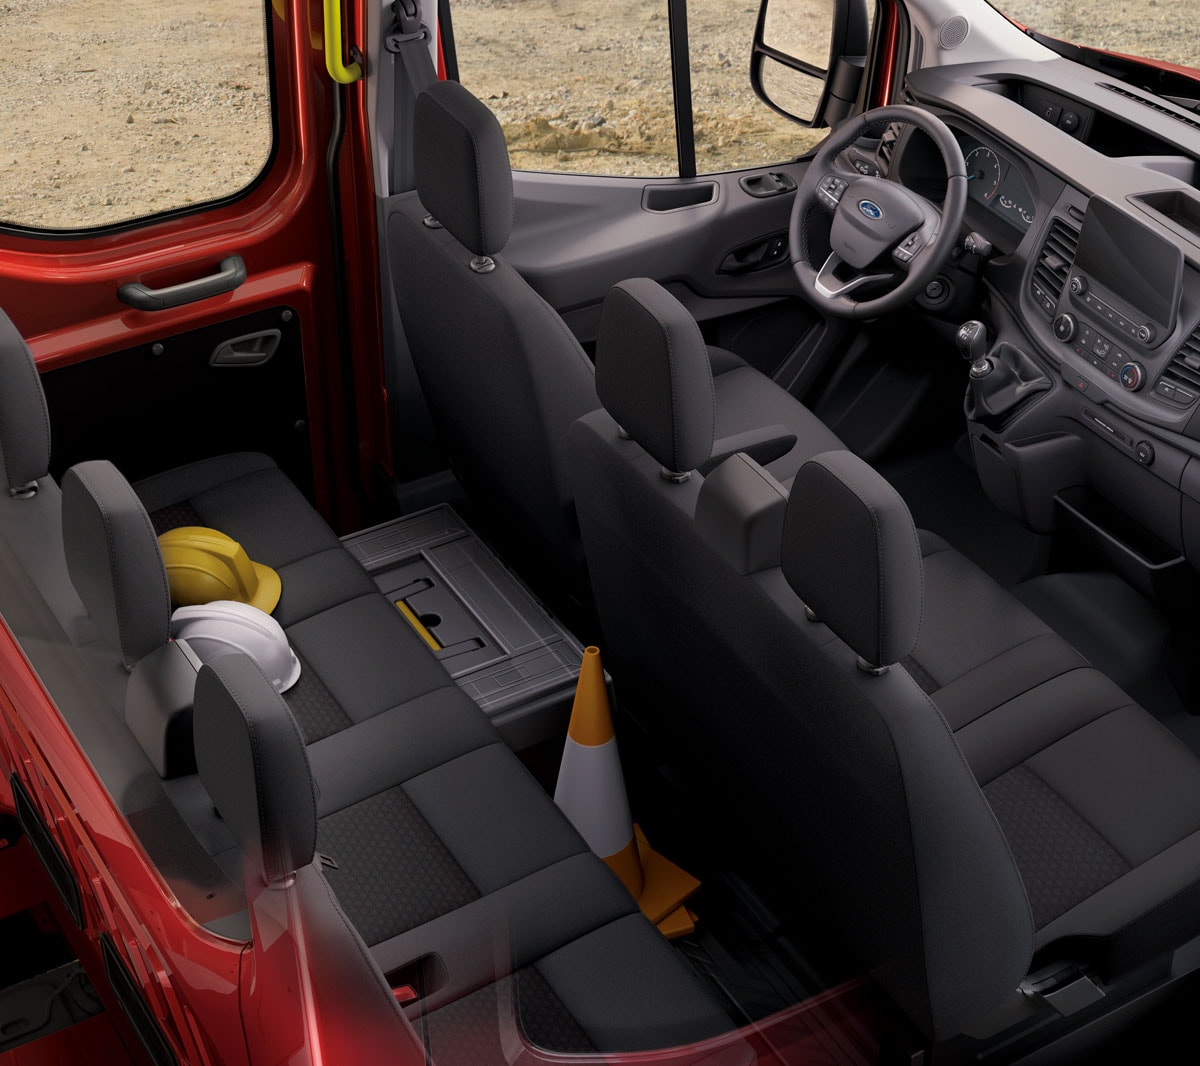 New Ford Transit Chassis Cab interior cabin view